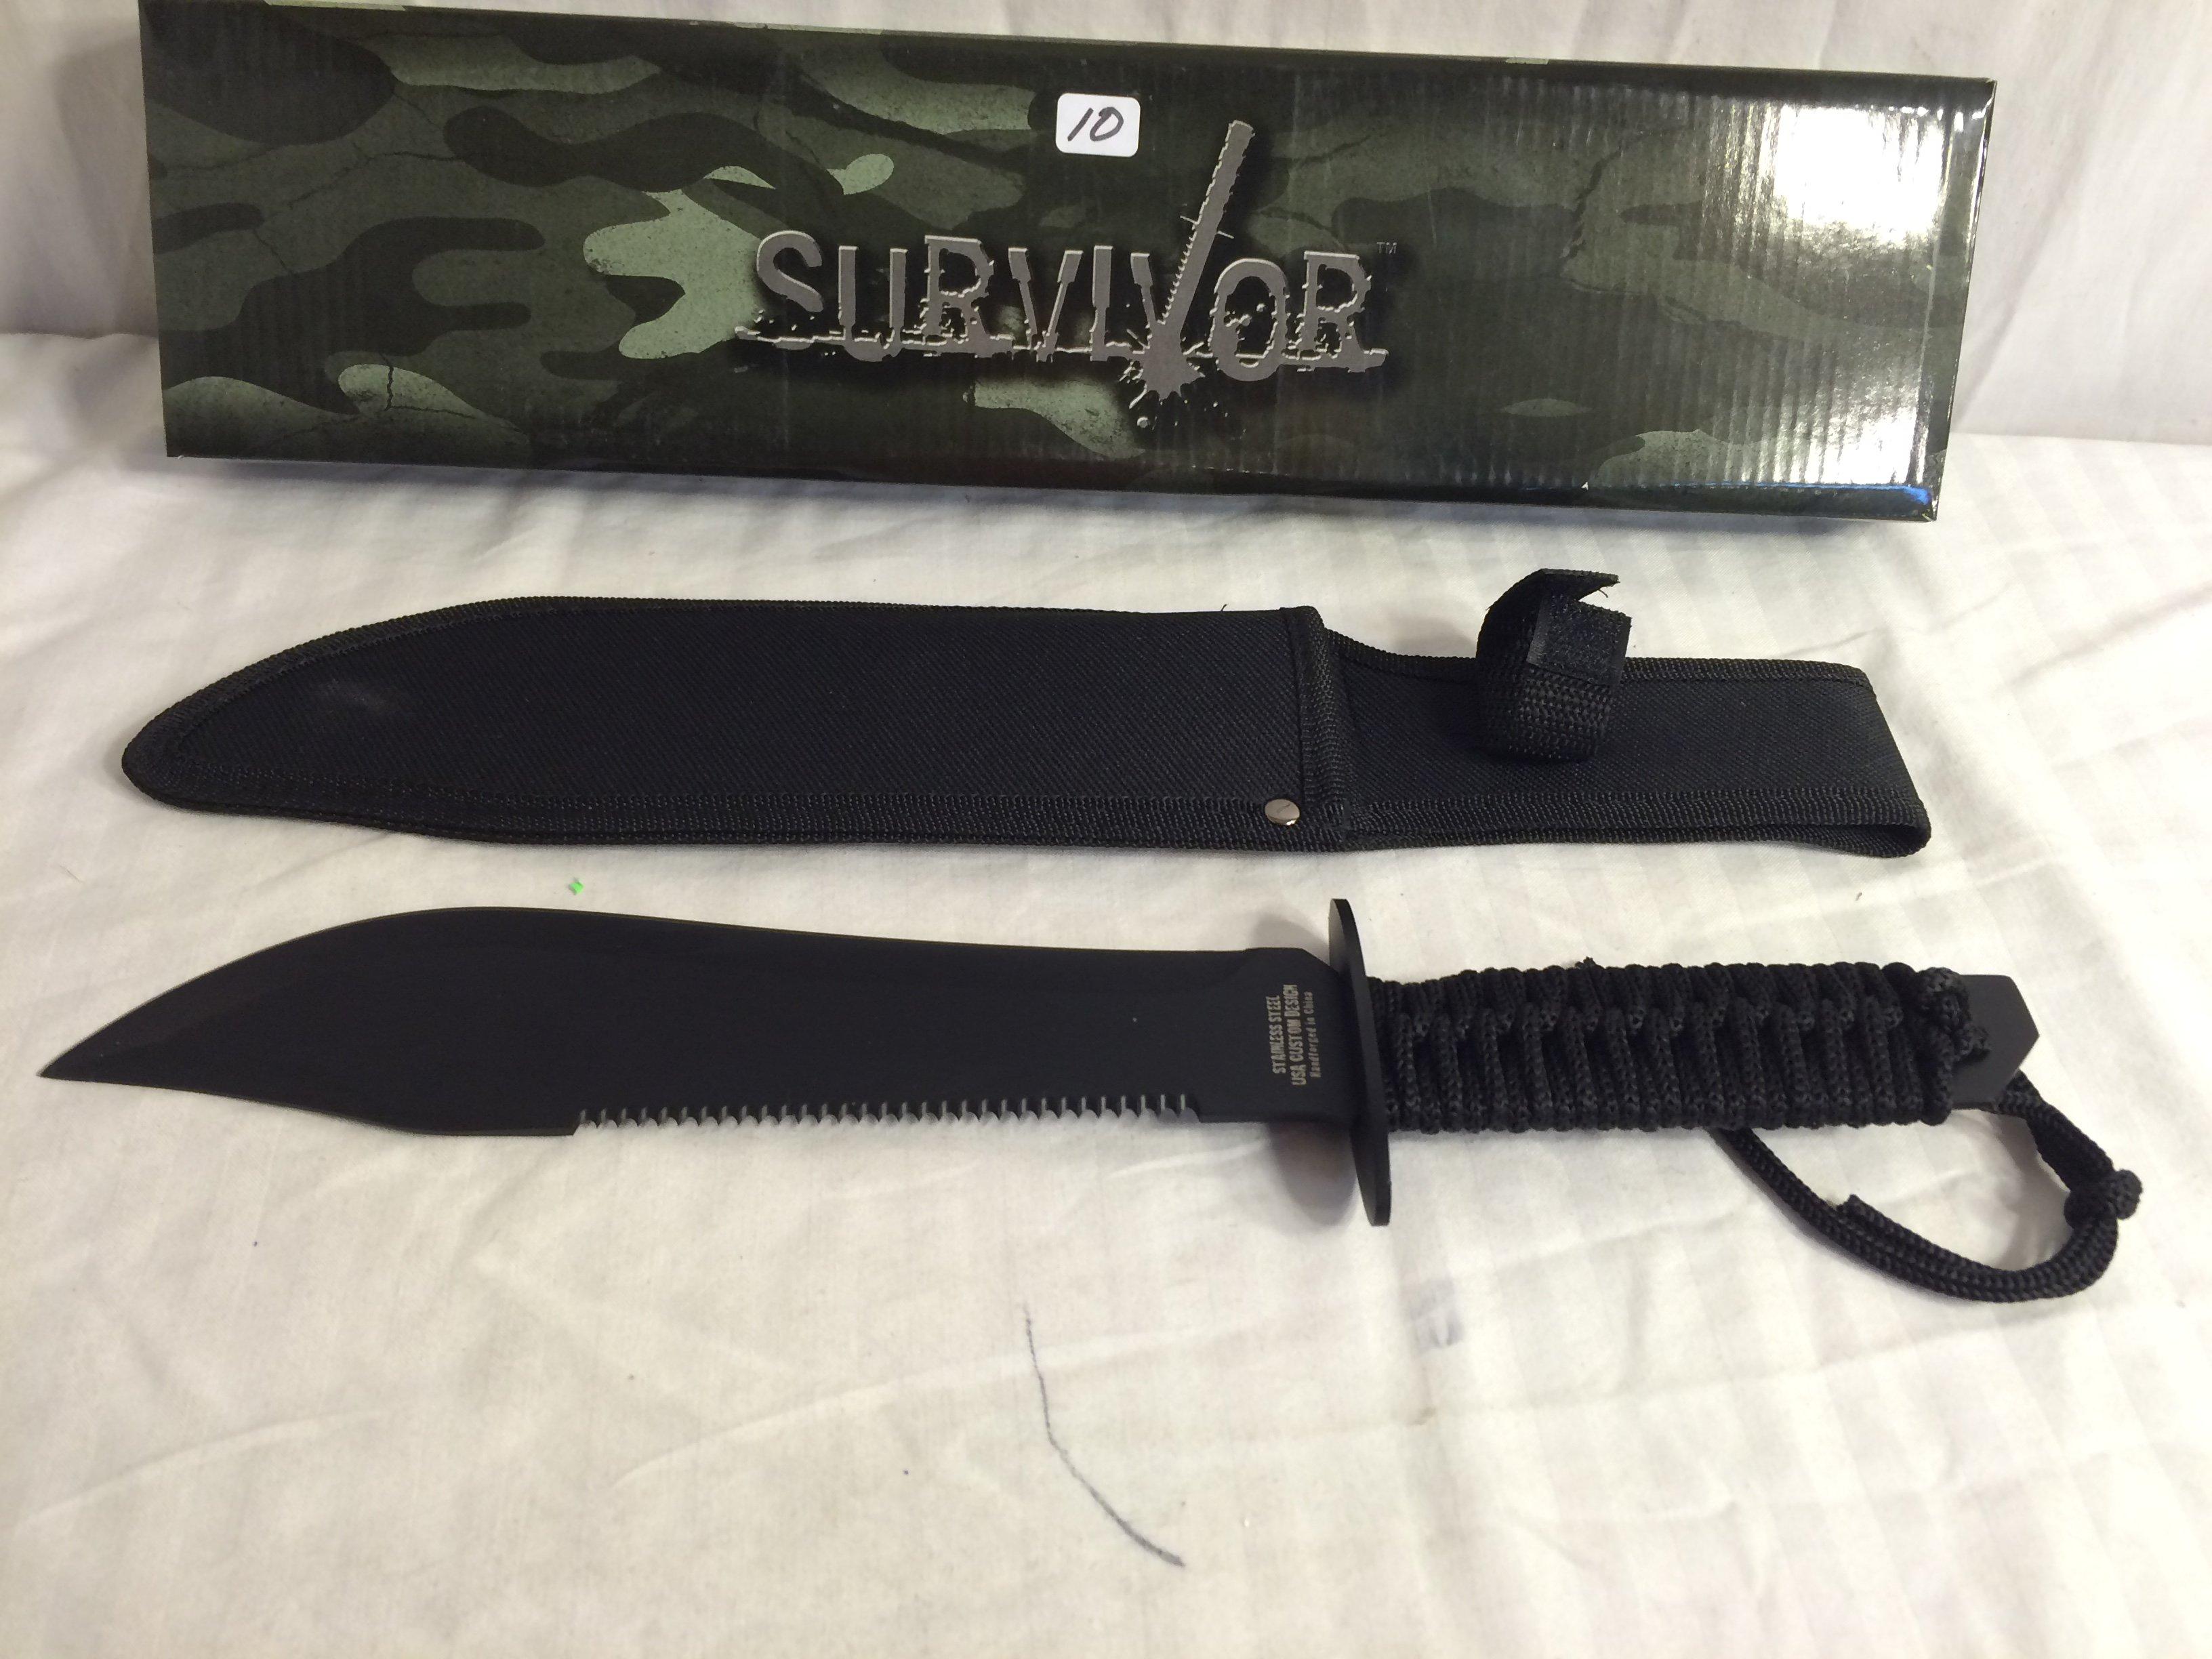 Collector NIP Master Cutlery Survivor Stainless Steel Knife #HK-6784 17" Long By 4" Box Size.